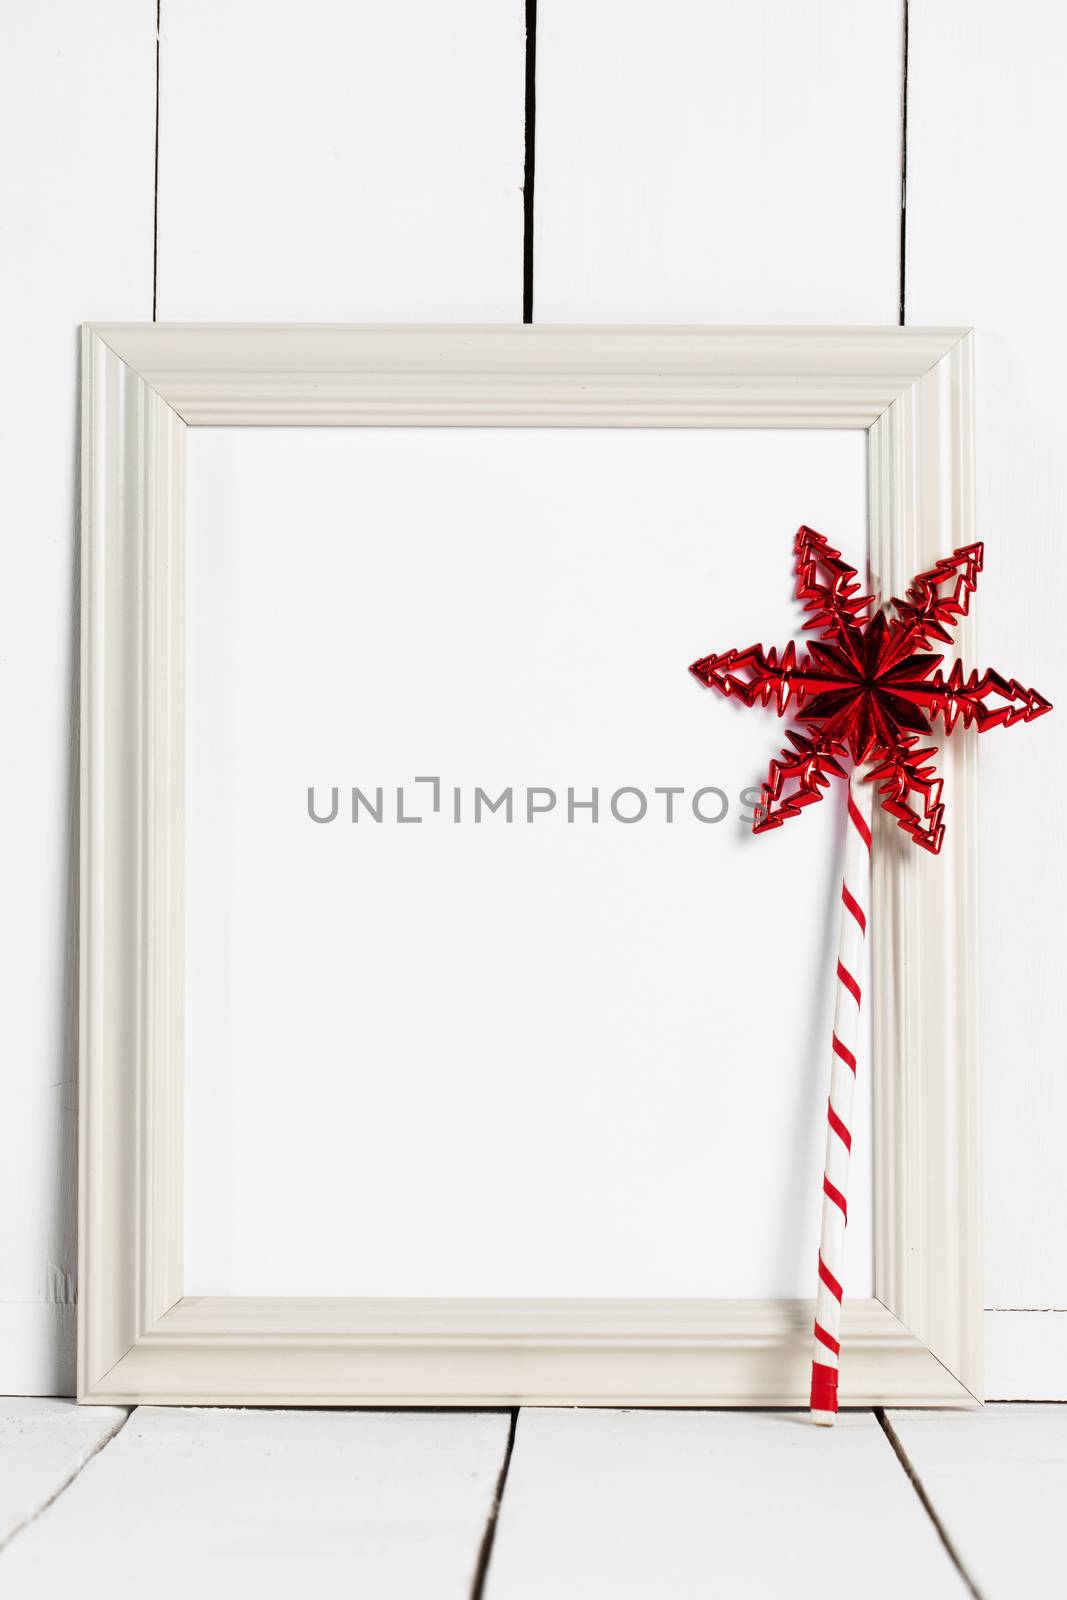 Vintage white wooden picture frame with blank white copy space and red star magic wand